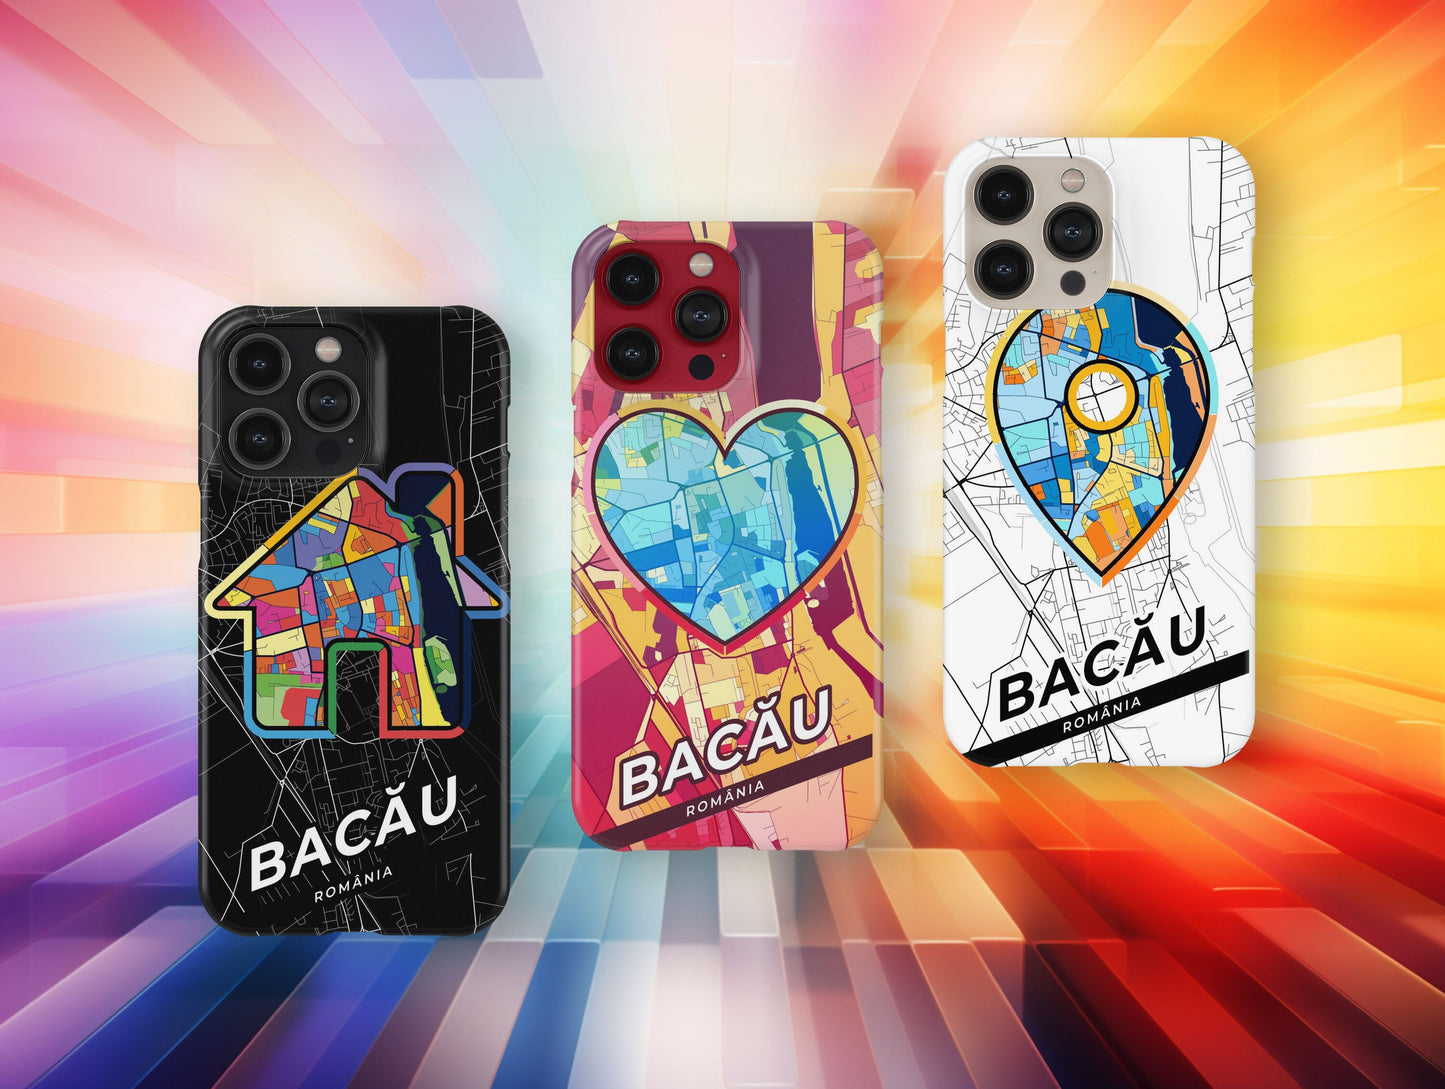 Bacău Romania slim phone case with colorful icon. Birthday, wedding or housewarming gift. Couple match cases.